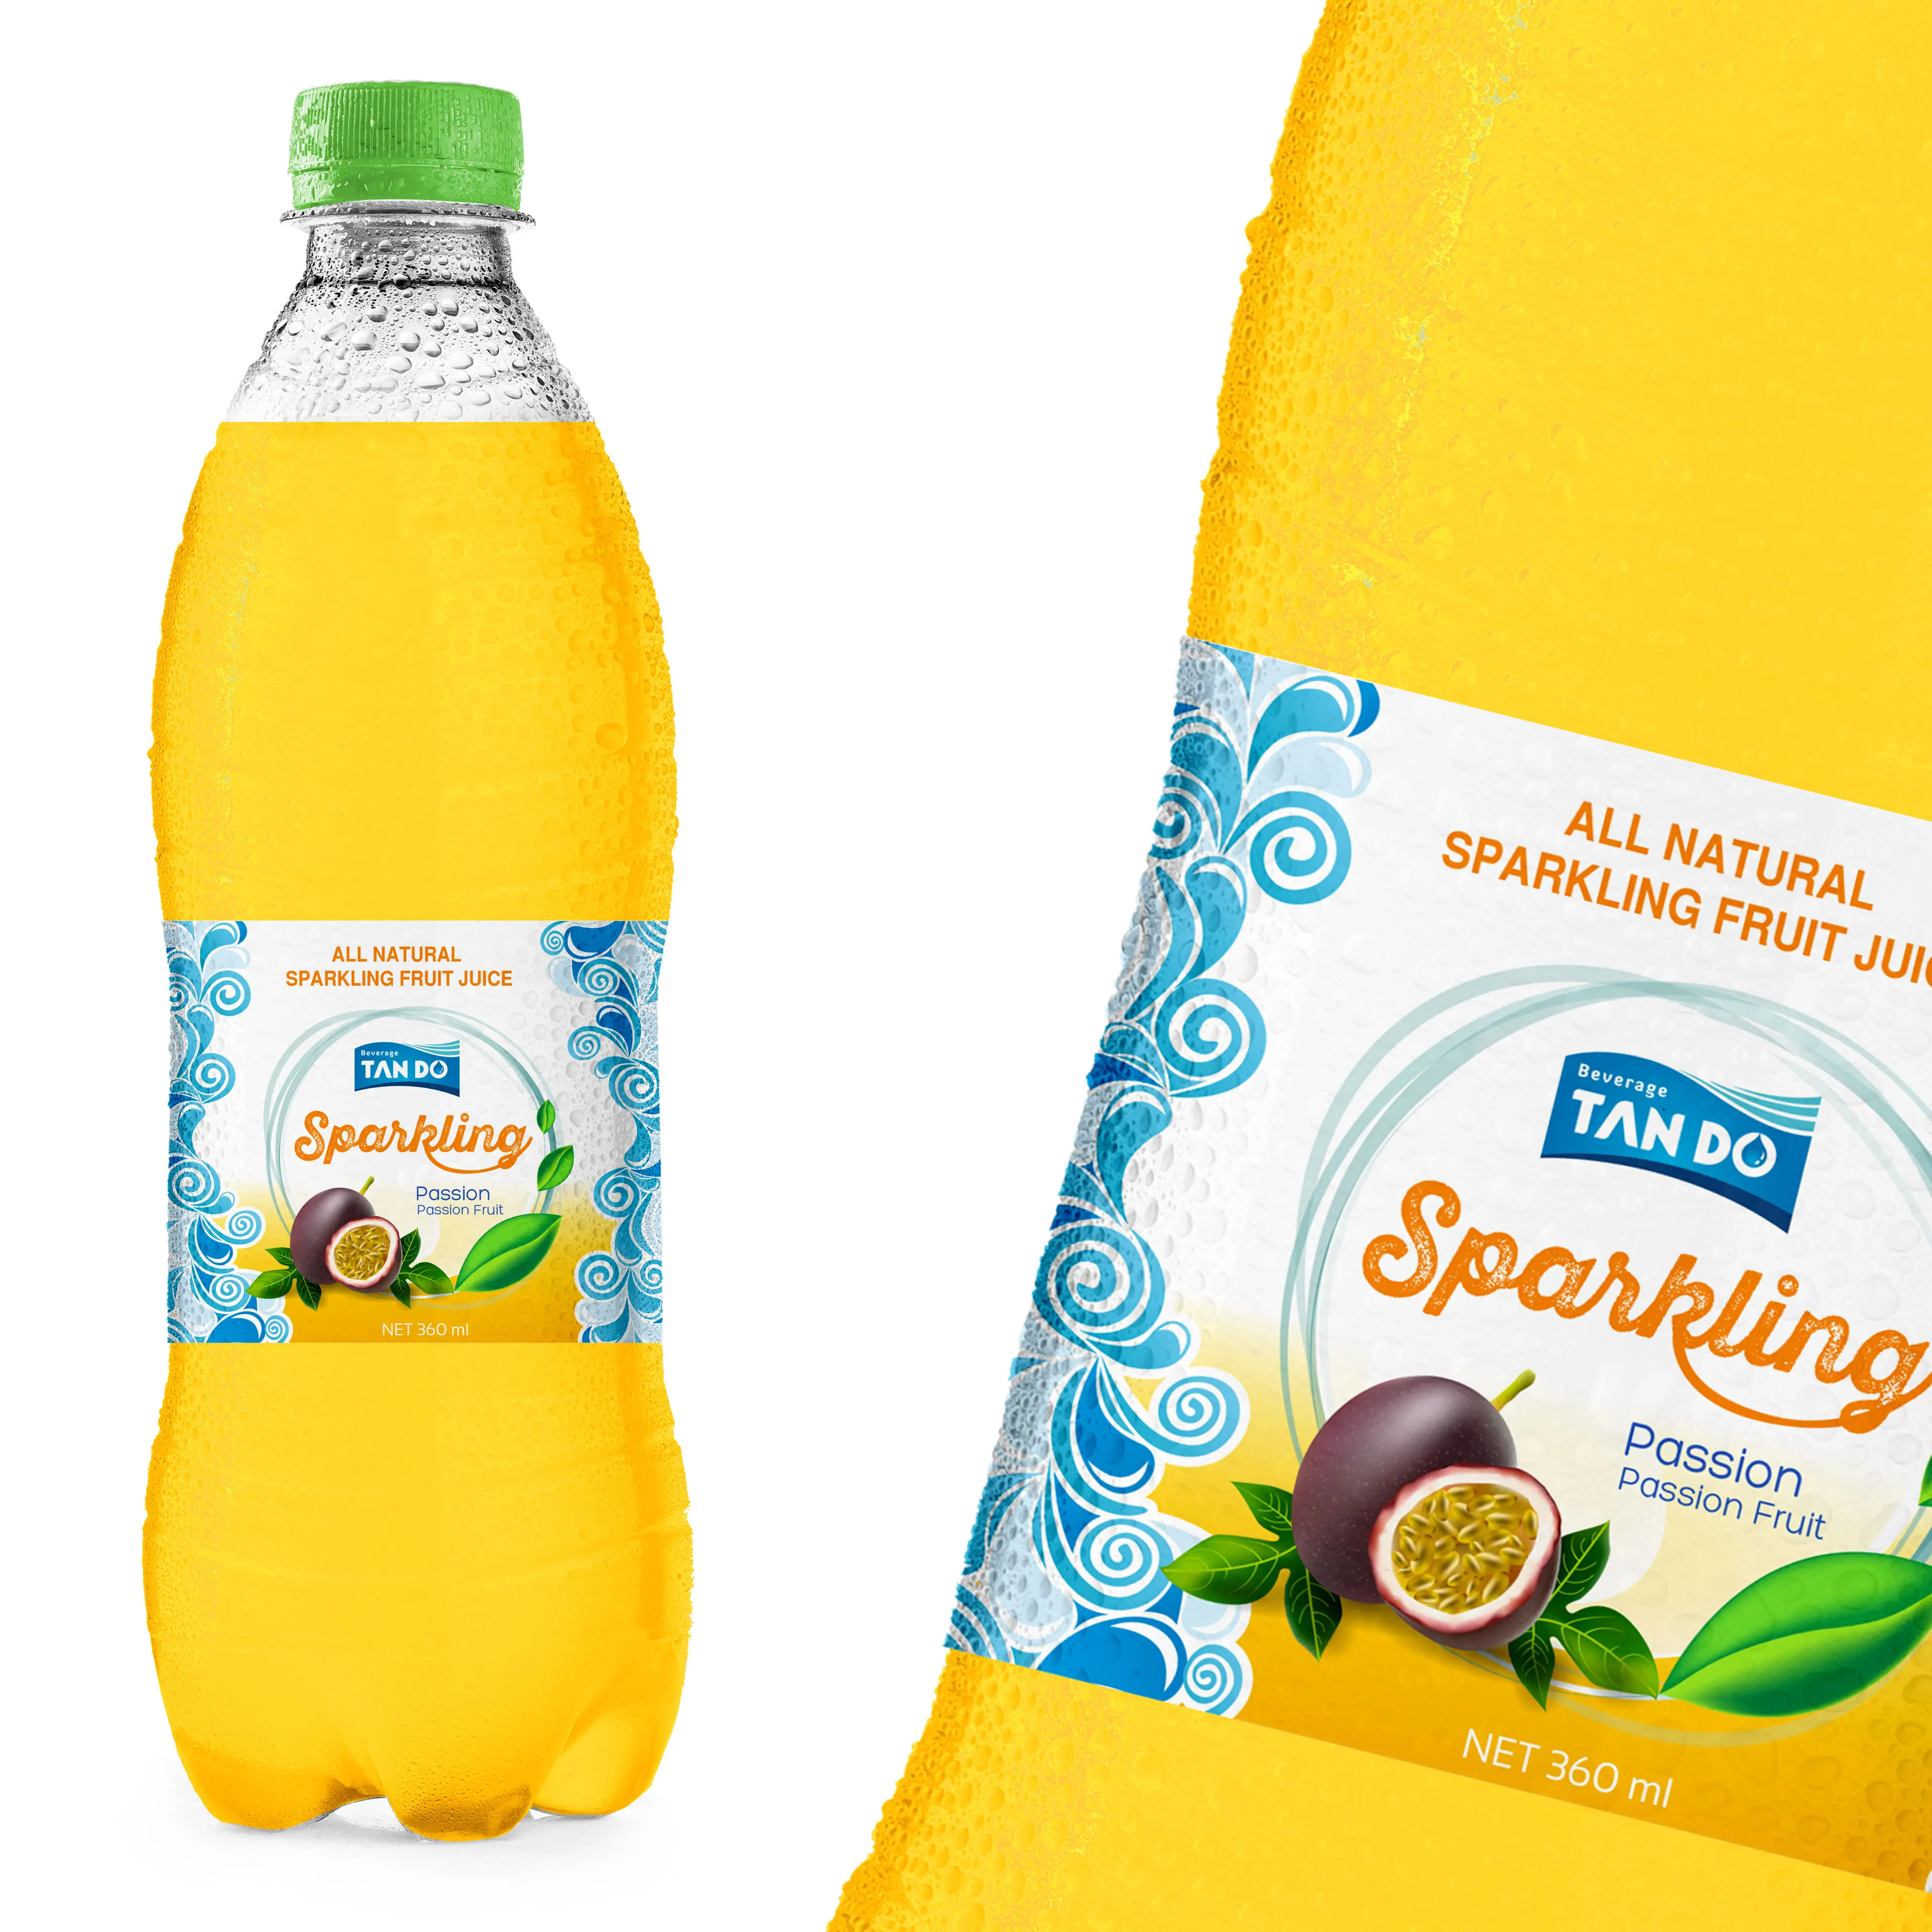 Flavored sparkling water fruity flavors direct from beverage factory in Vietnam